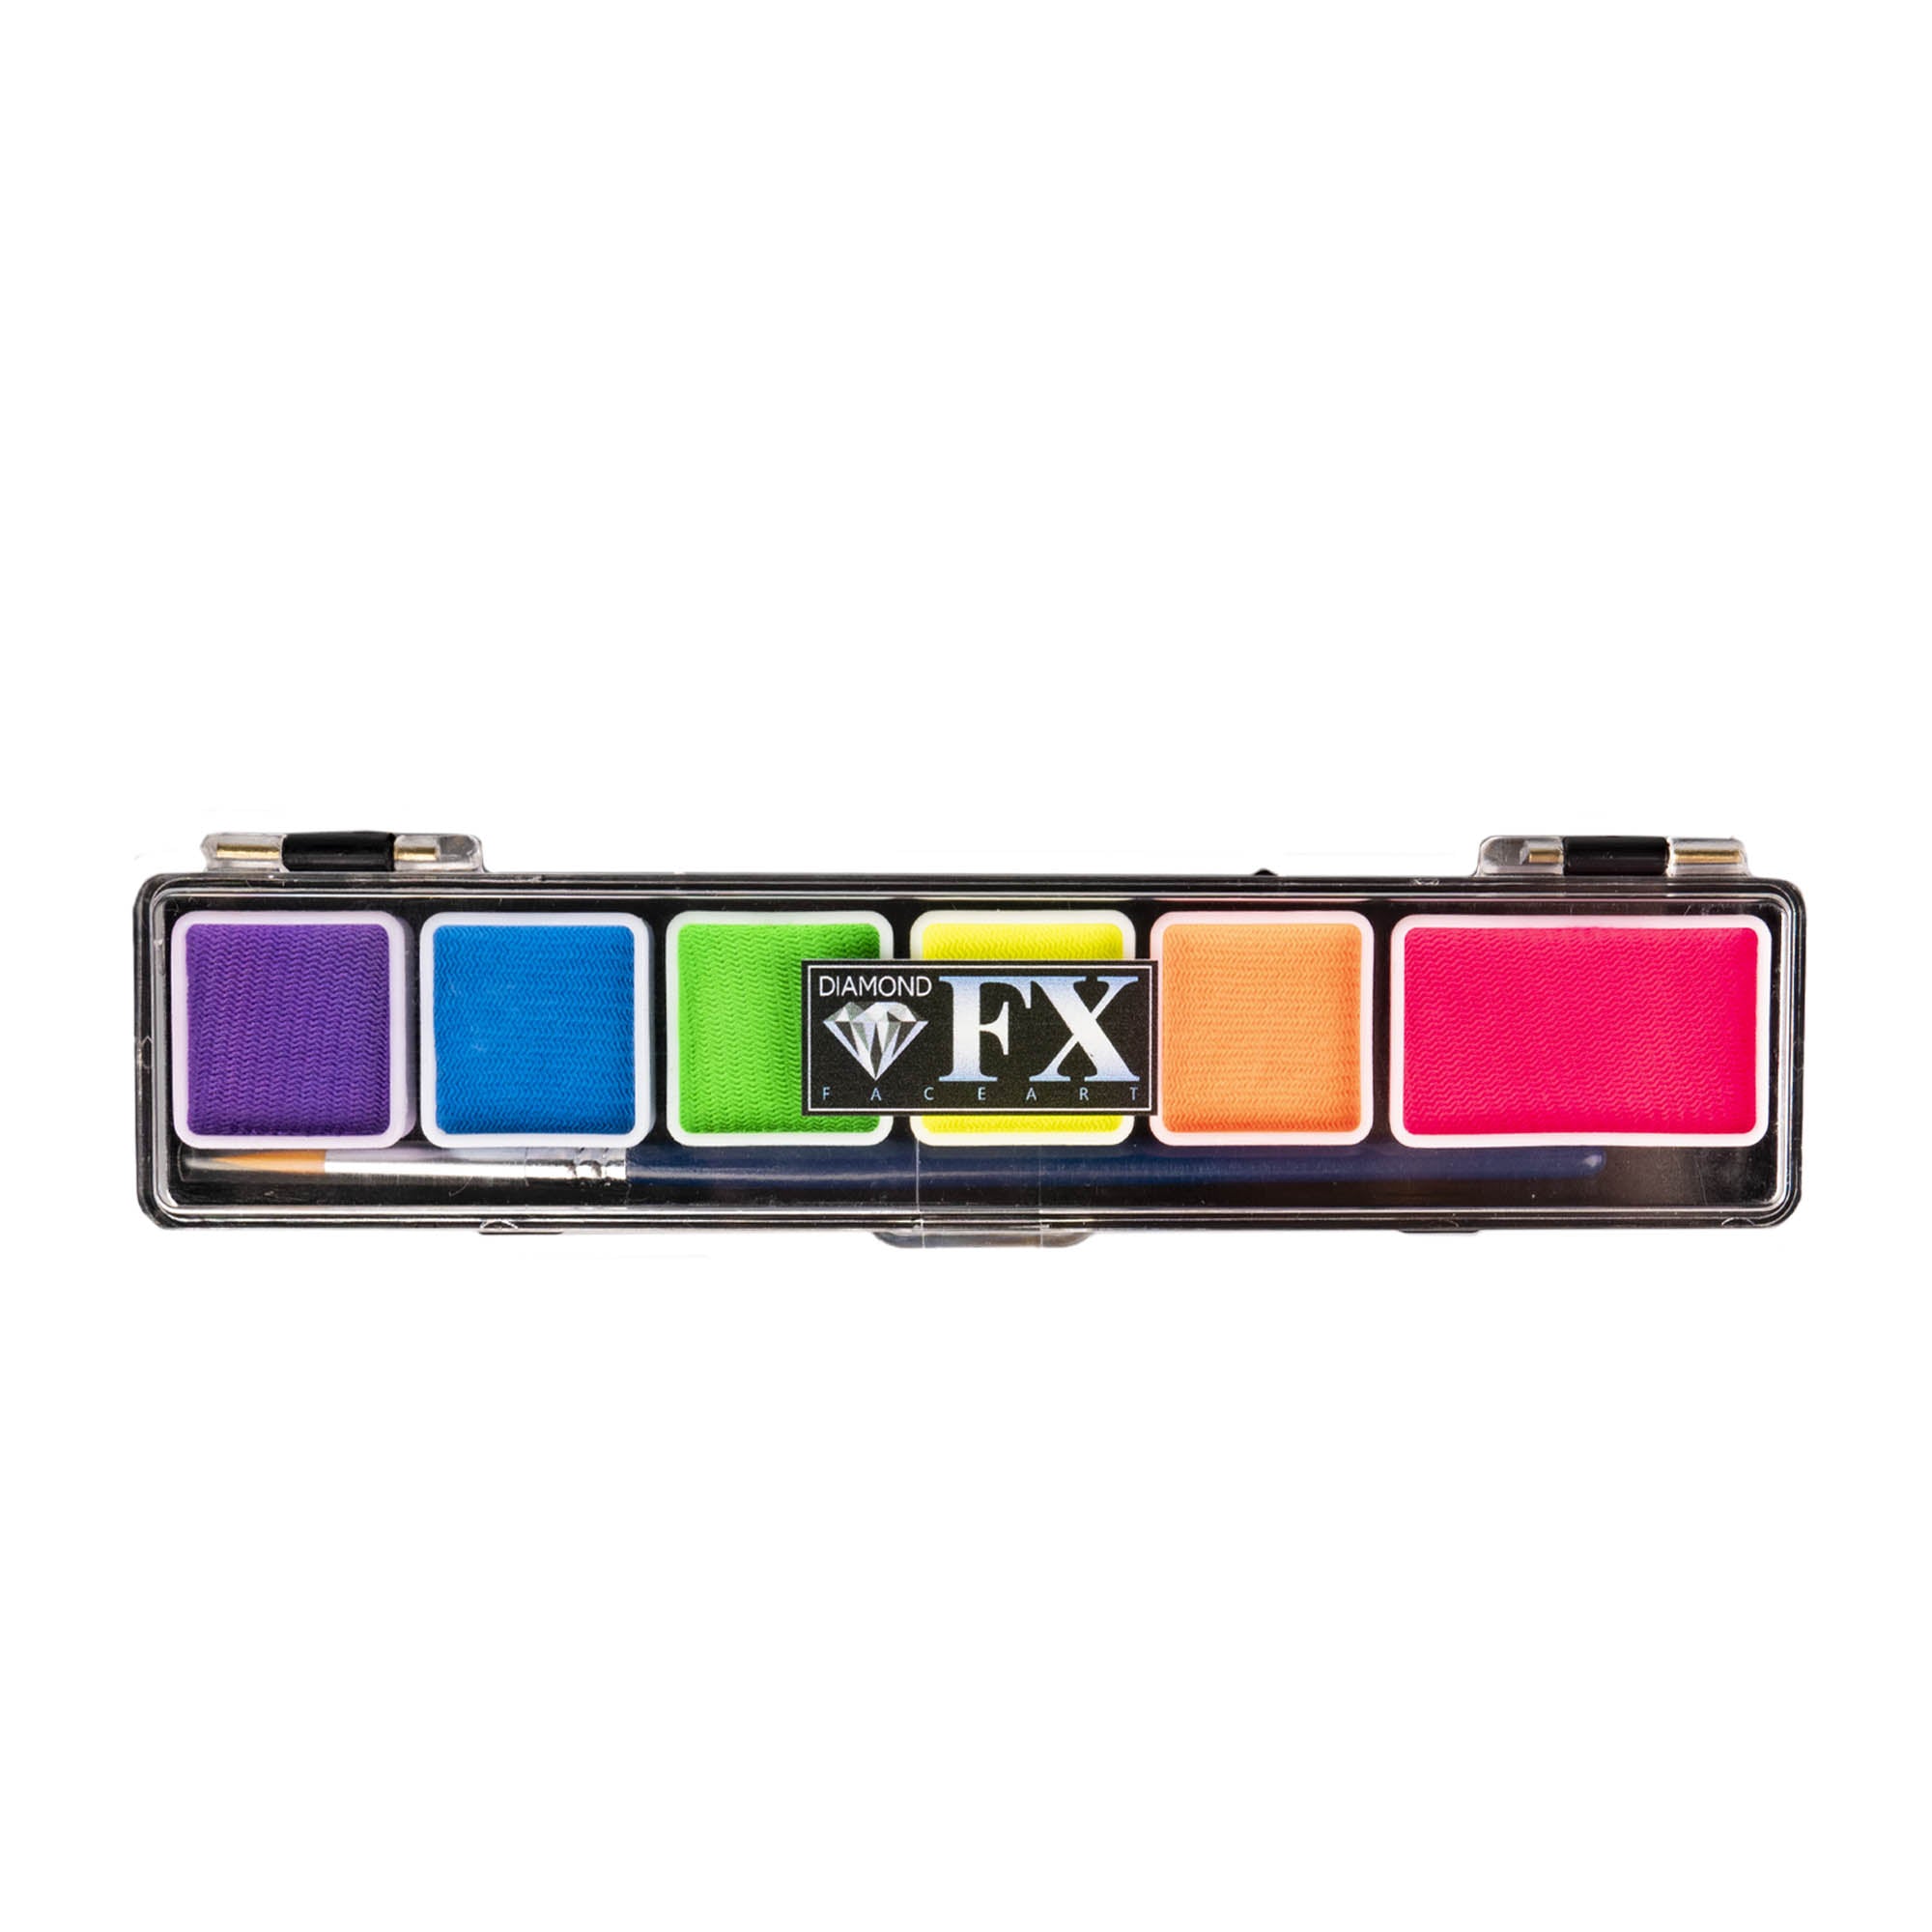 Diamond FX mini 6 colour neon palette with the lid closed on a white background